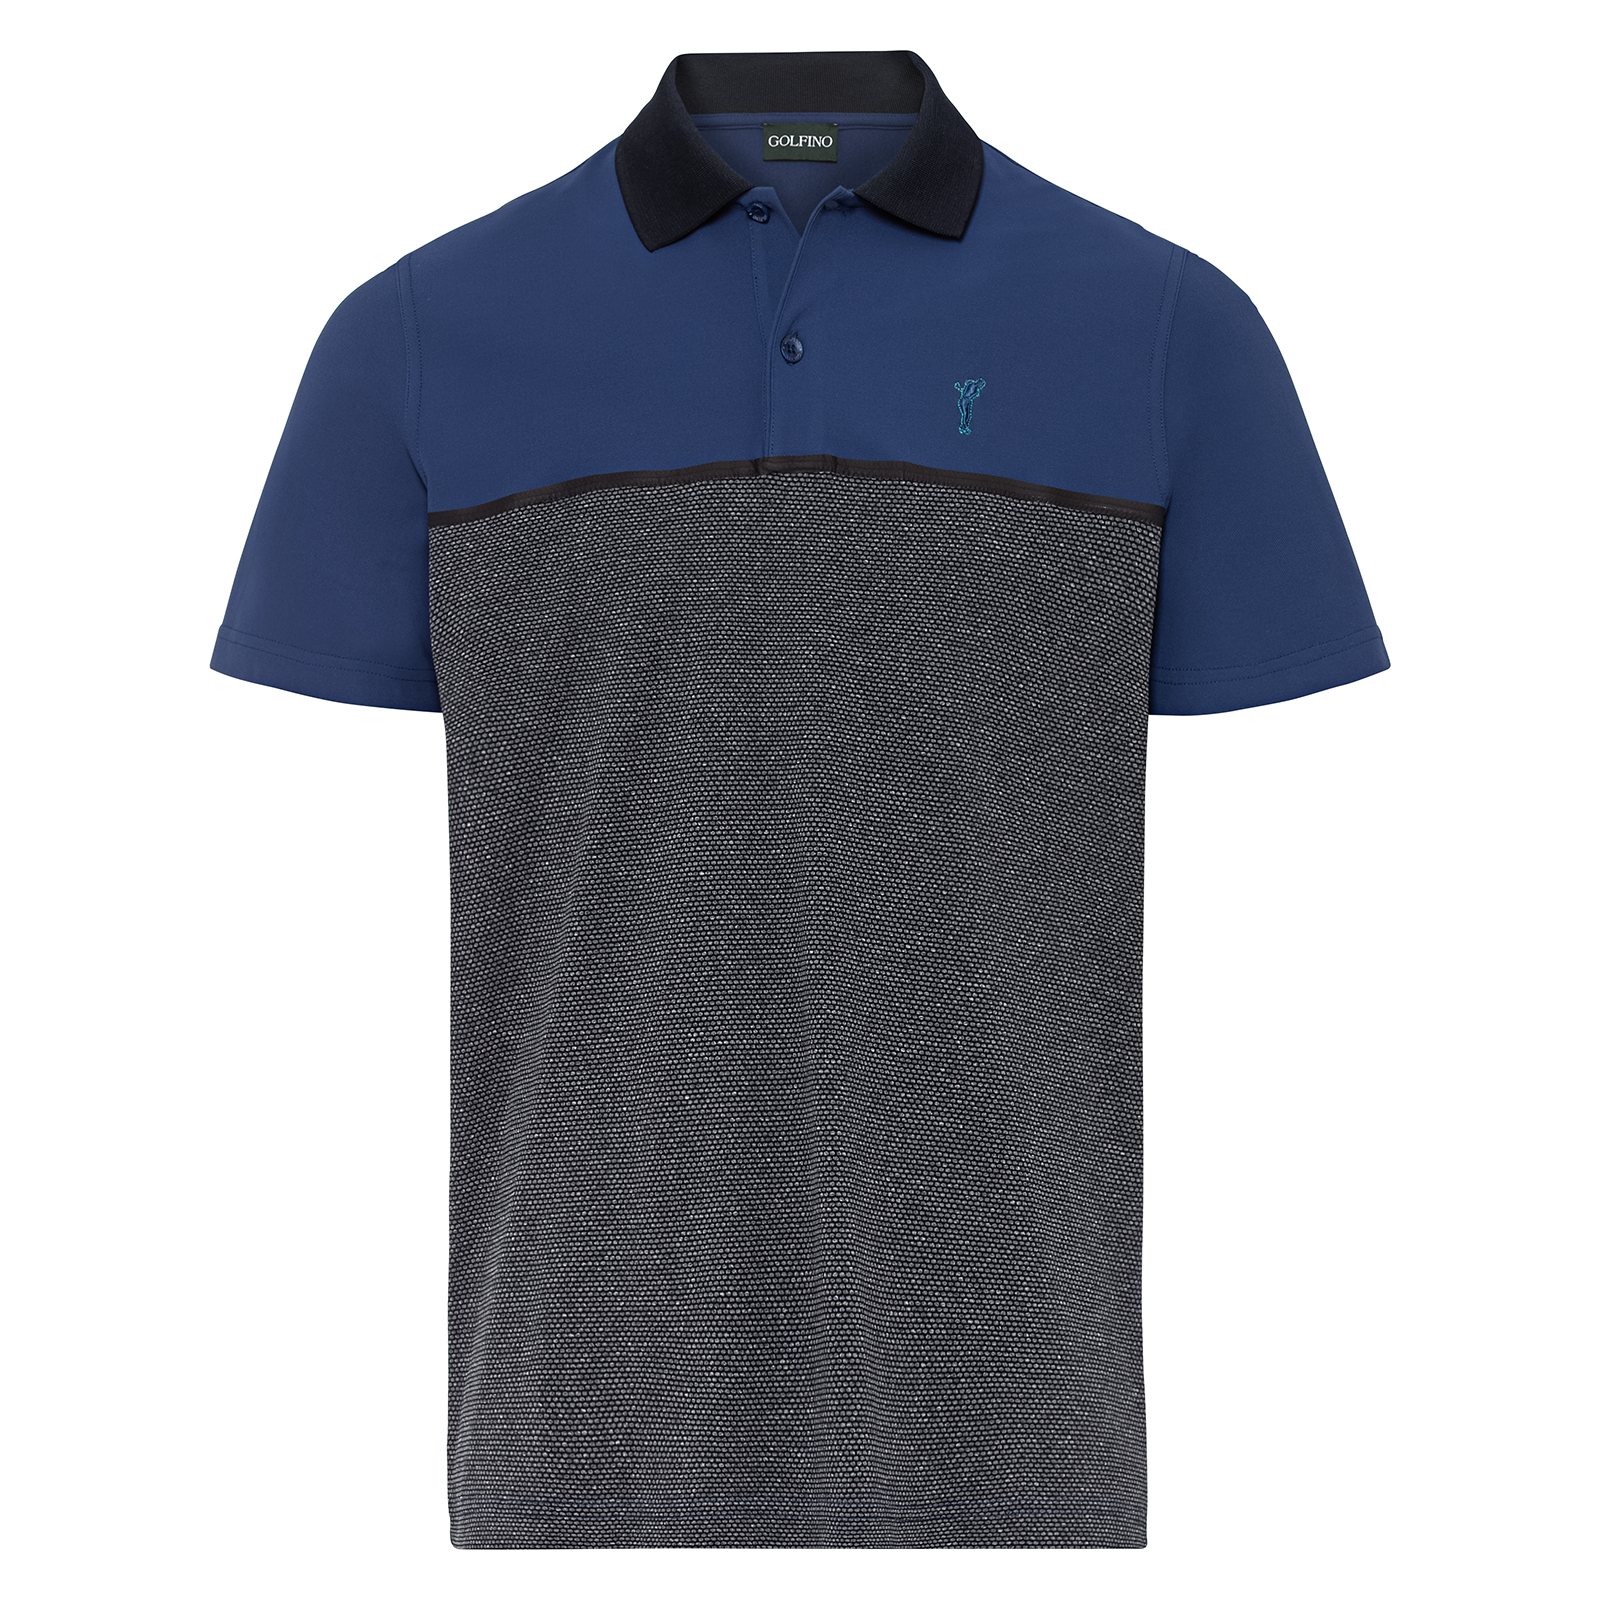 Men's golf polo with colour blocking elements and moisture management function